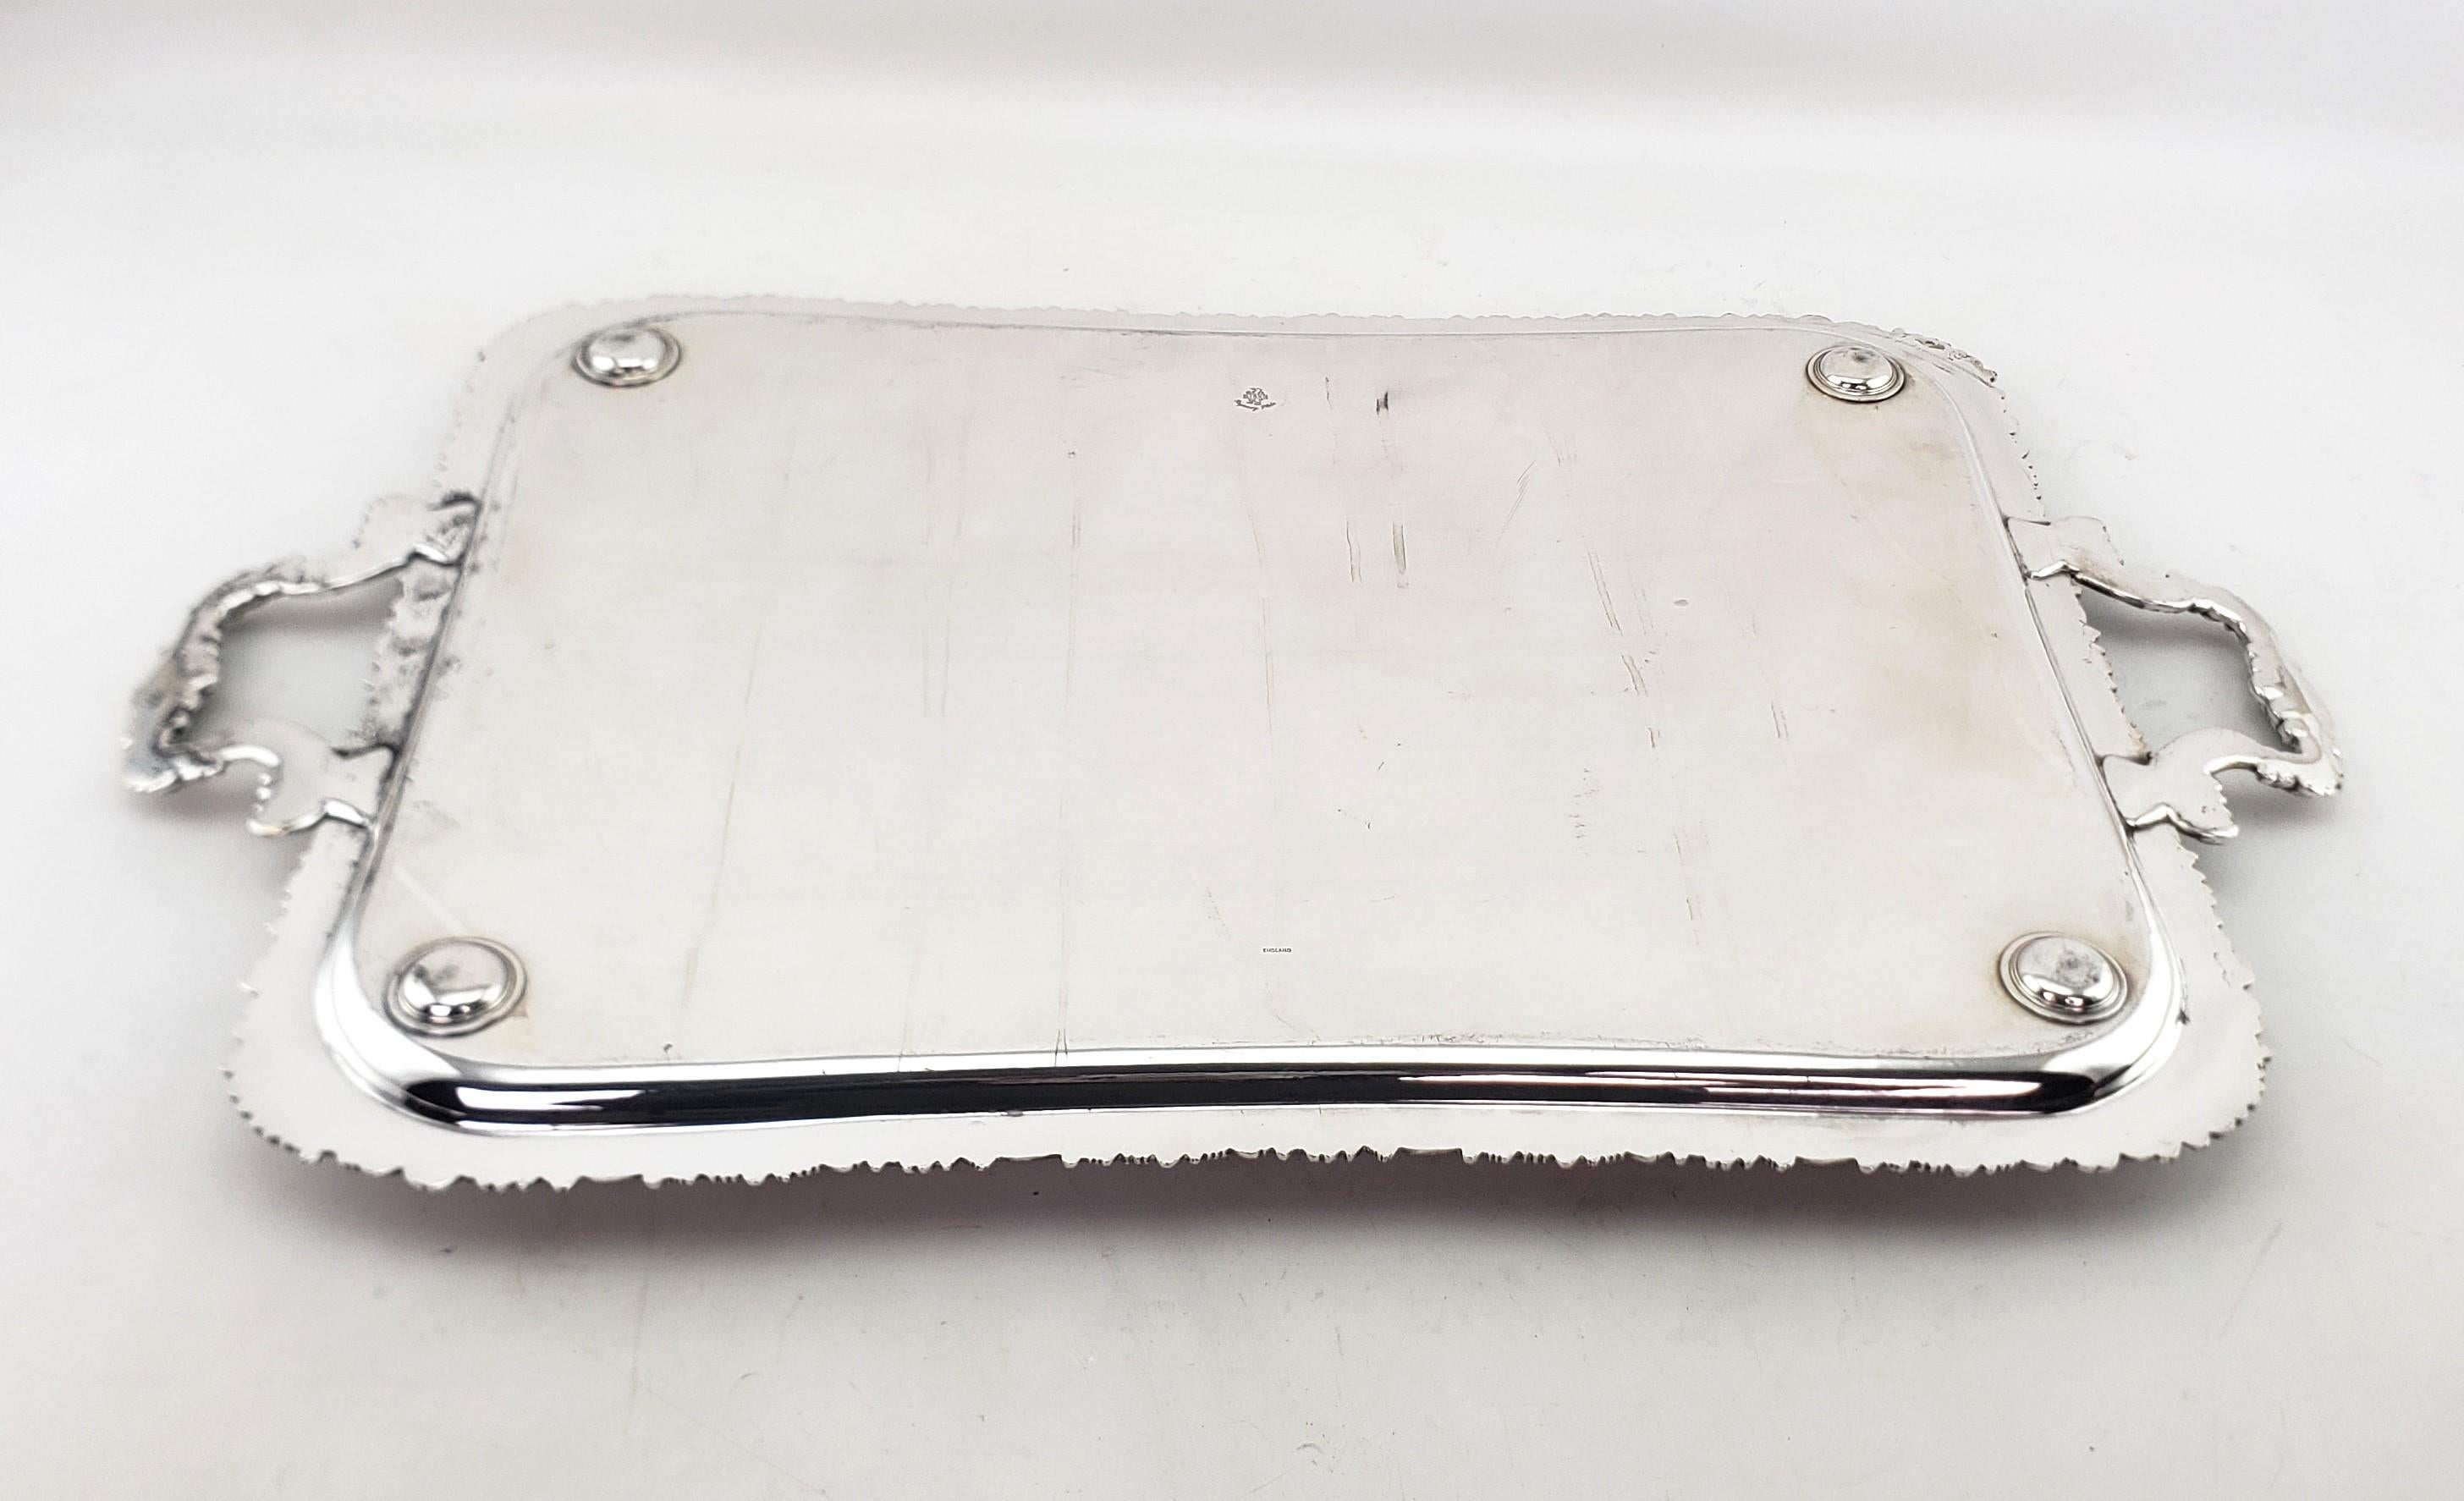 Large Antique Birks Silver Plated Serving Tray with Leaf & Berry Decoration For Sale 7